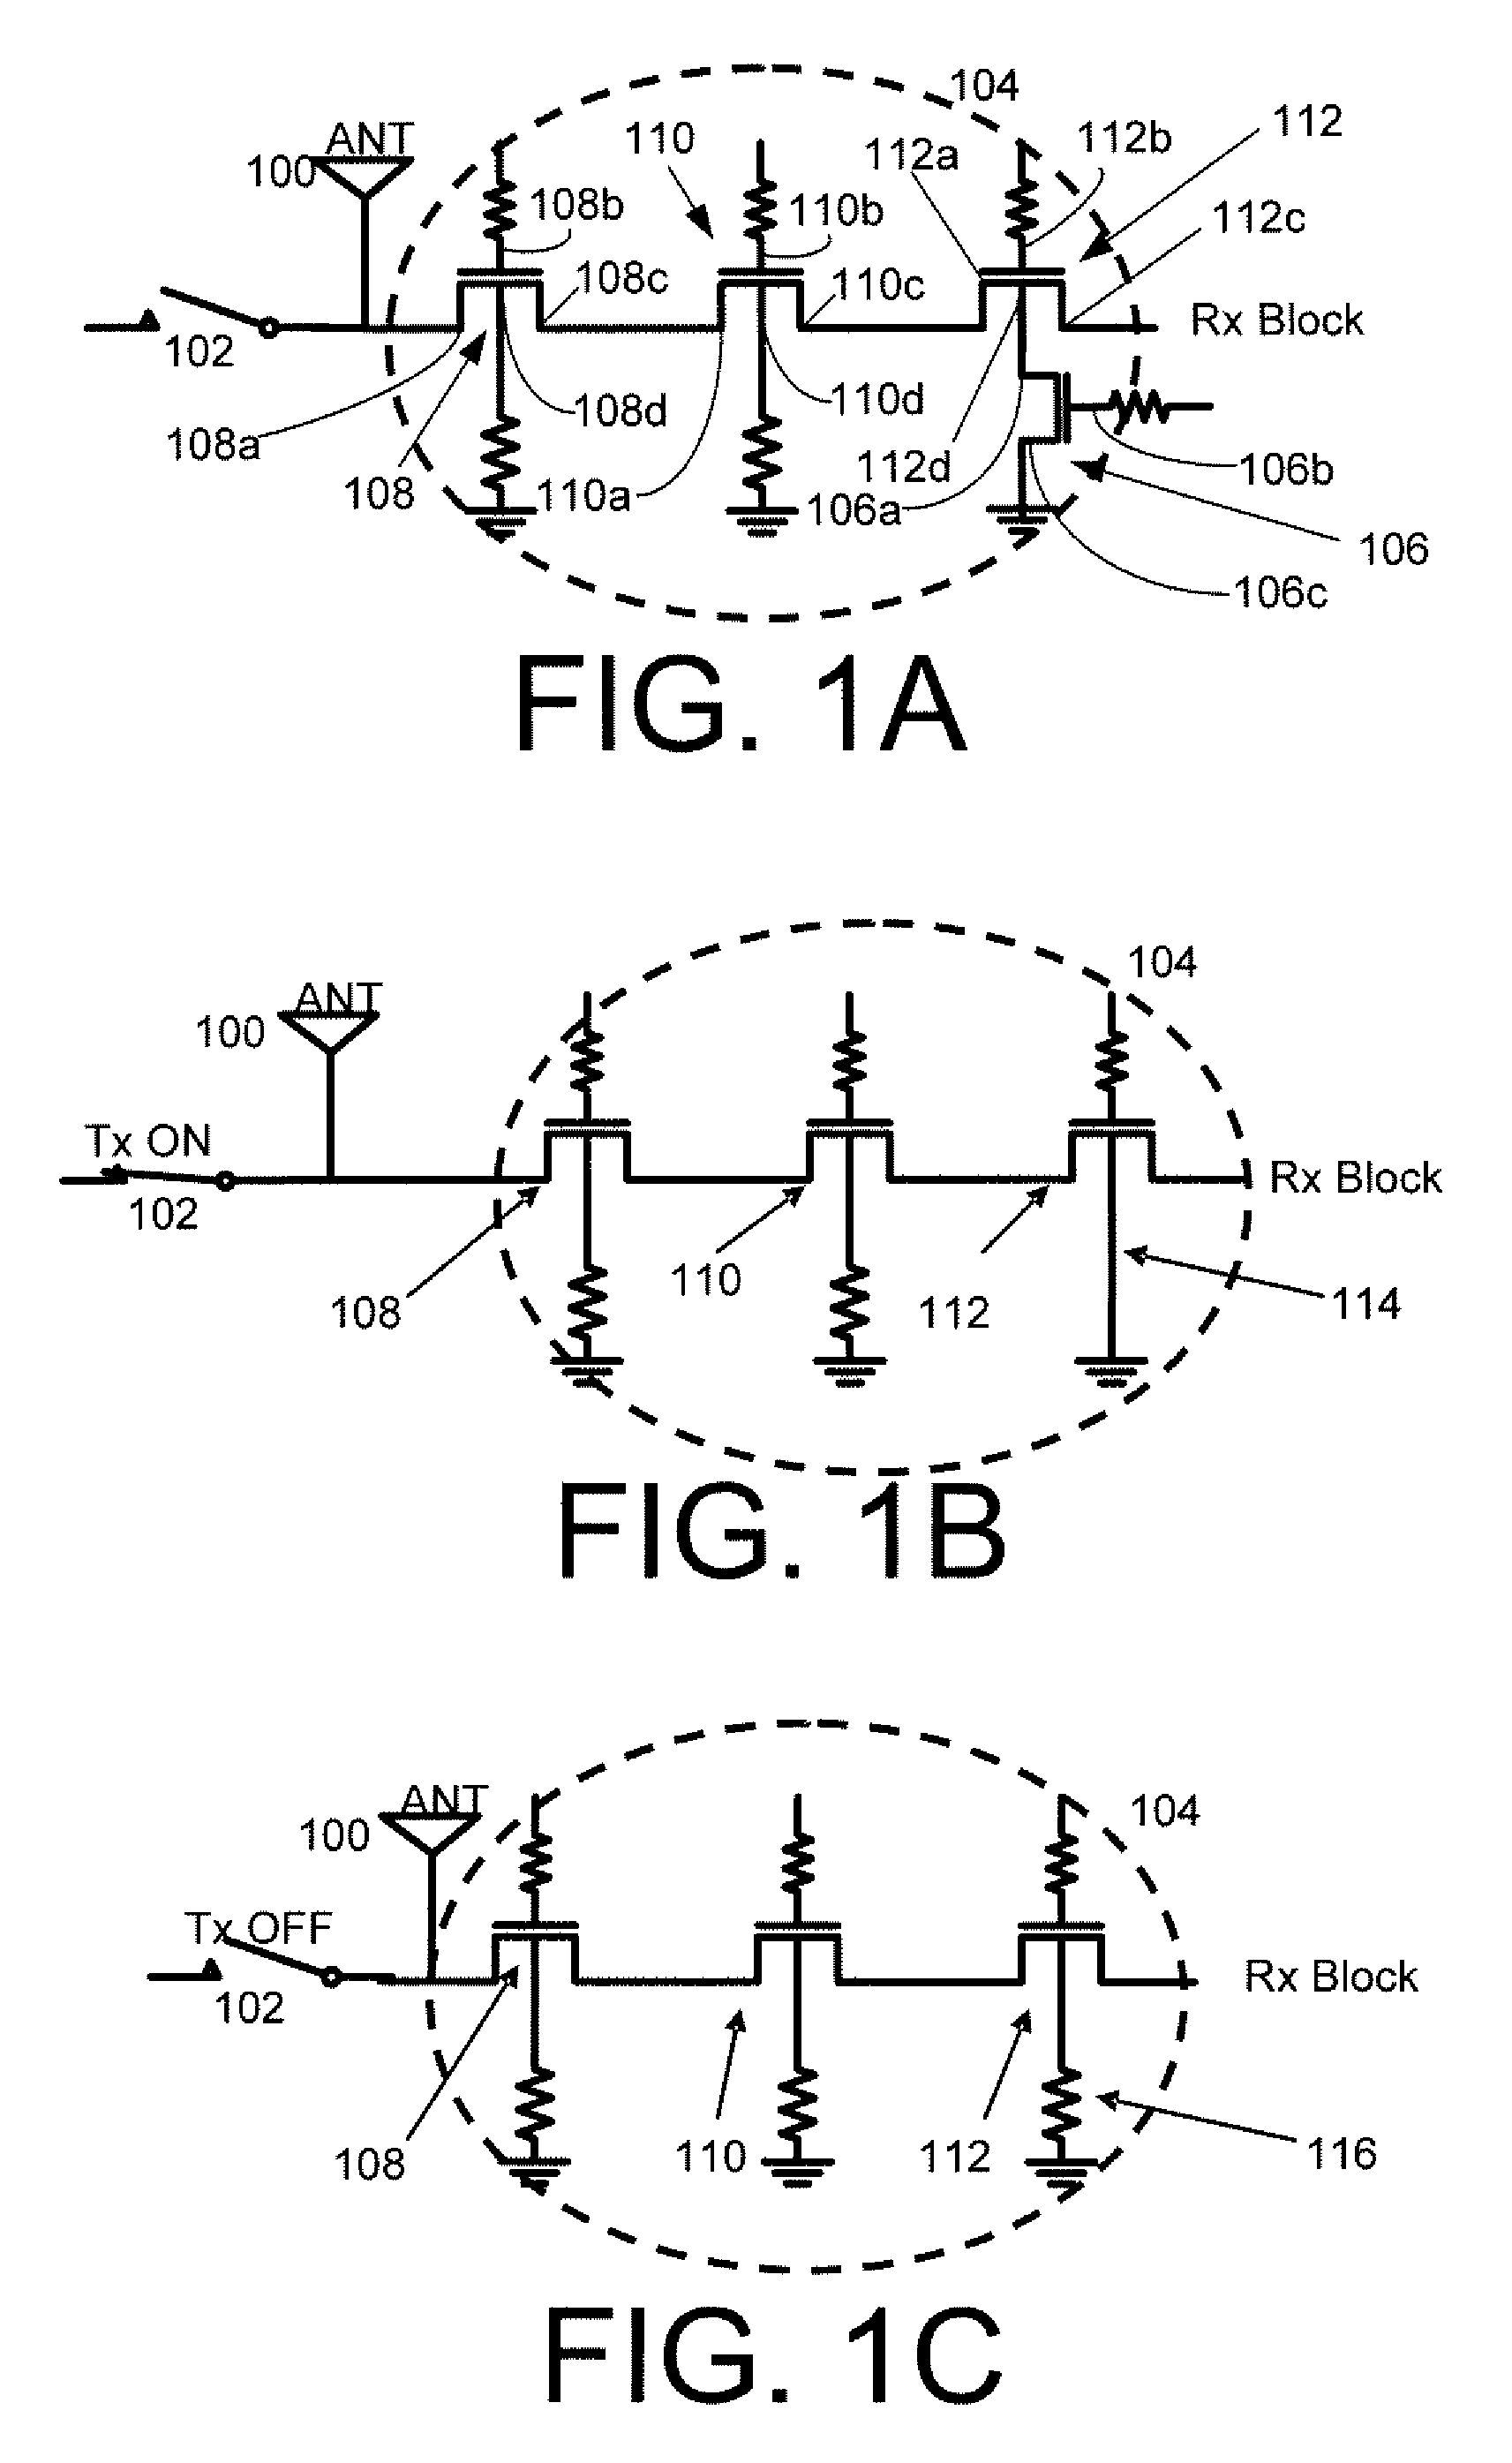 Systems, Methods and Apparatuses for High Power Complementary Metal Oxide Semiconductor (CMOS) Antenna Switches Using Body Switching and External Component in Multi-Stacking Structure